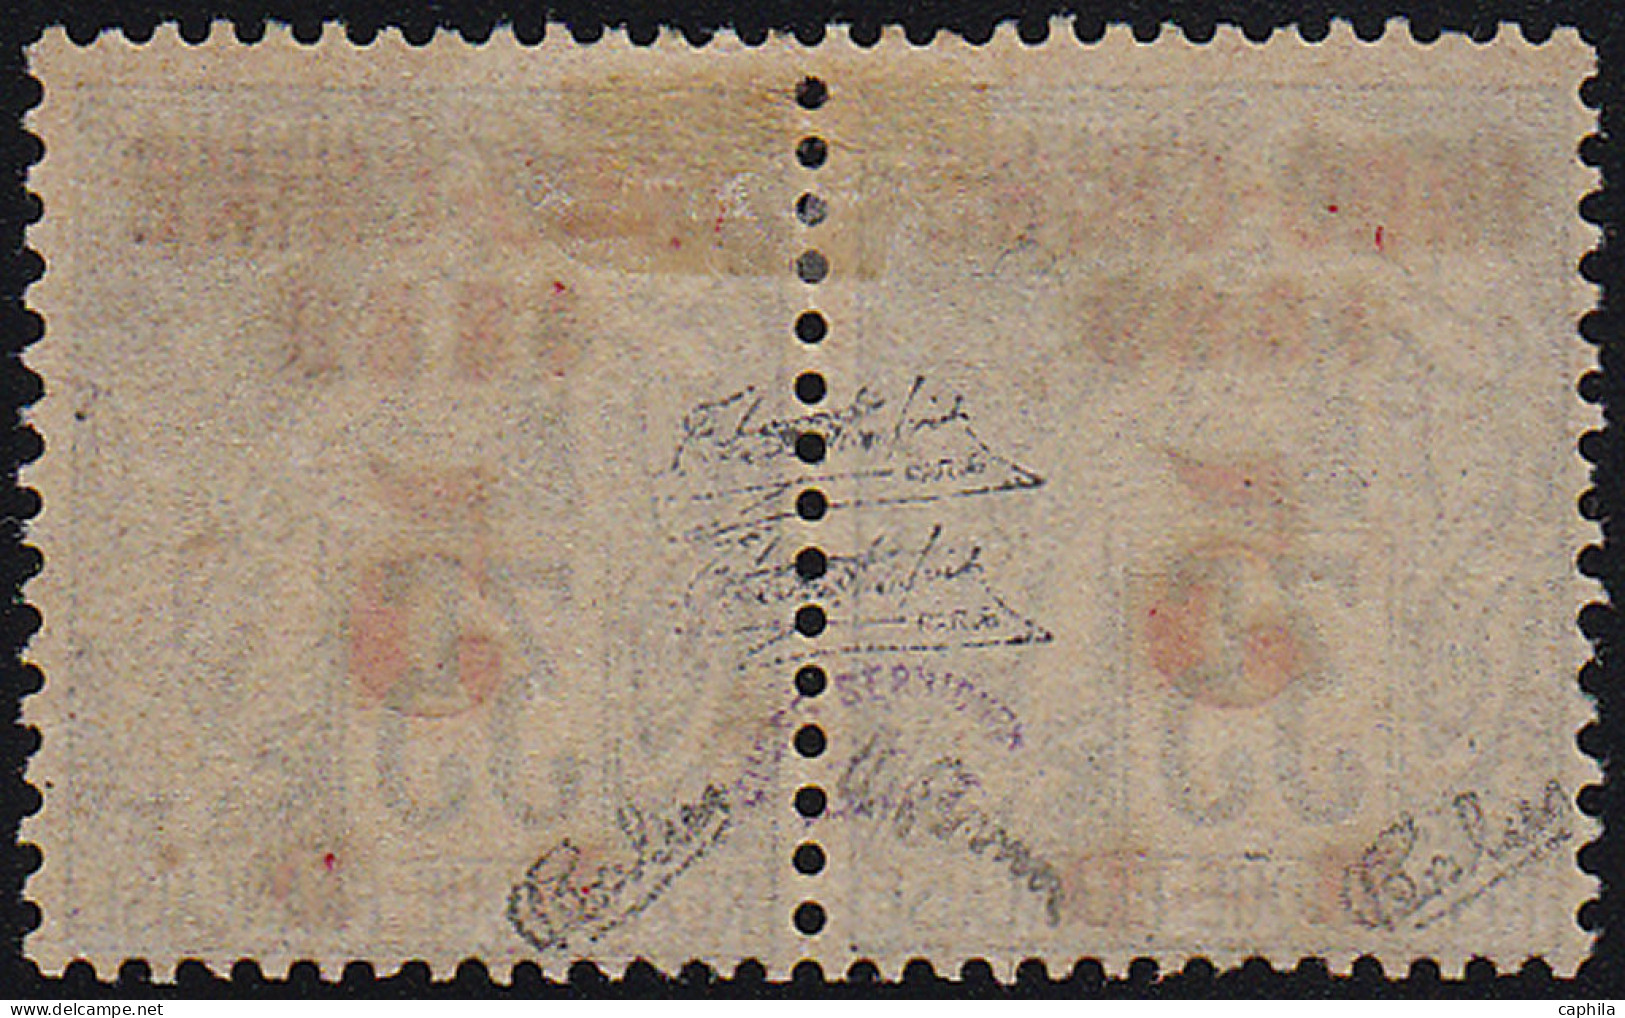 (*) INDOCHINE - Poste - 1aa, Paire Horizontale, Chiffres Plus Petits Tenant à Normal - Unused Stamps